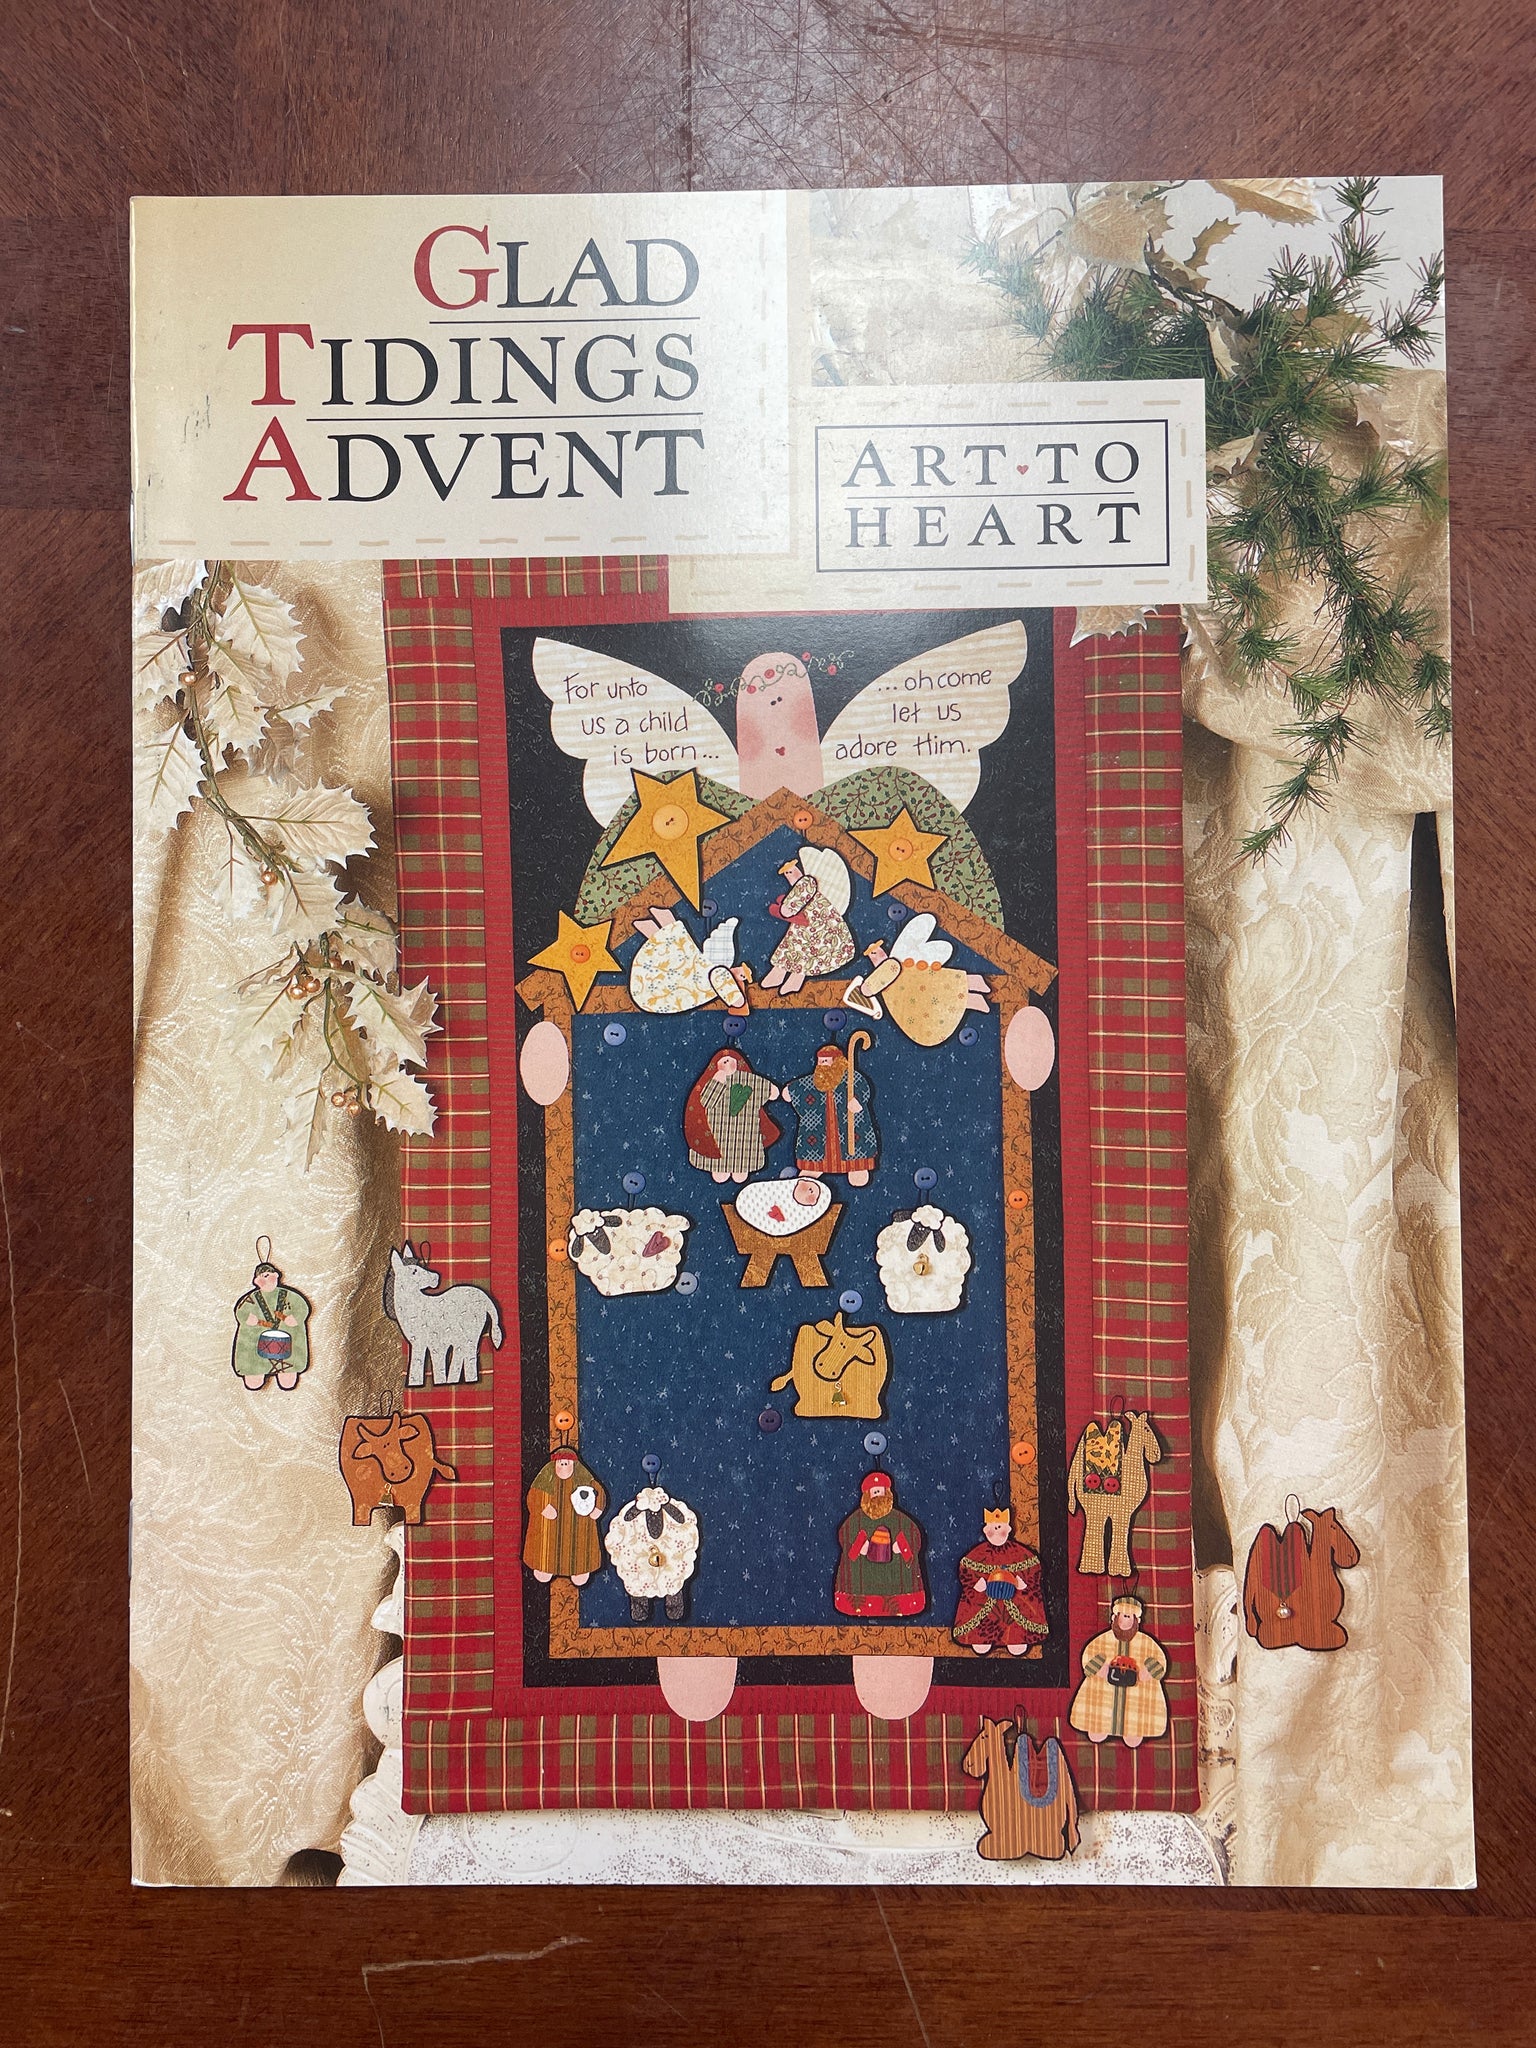 1999 Quilted Appliqué Pattern Book - "Glad Tidings Advent"